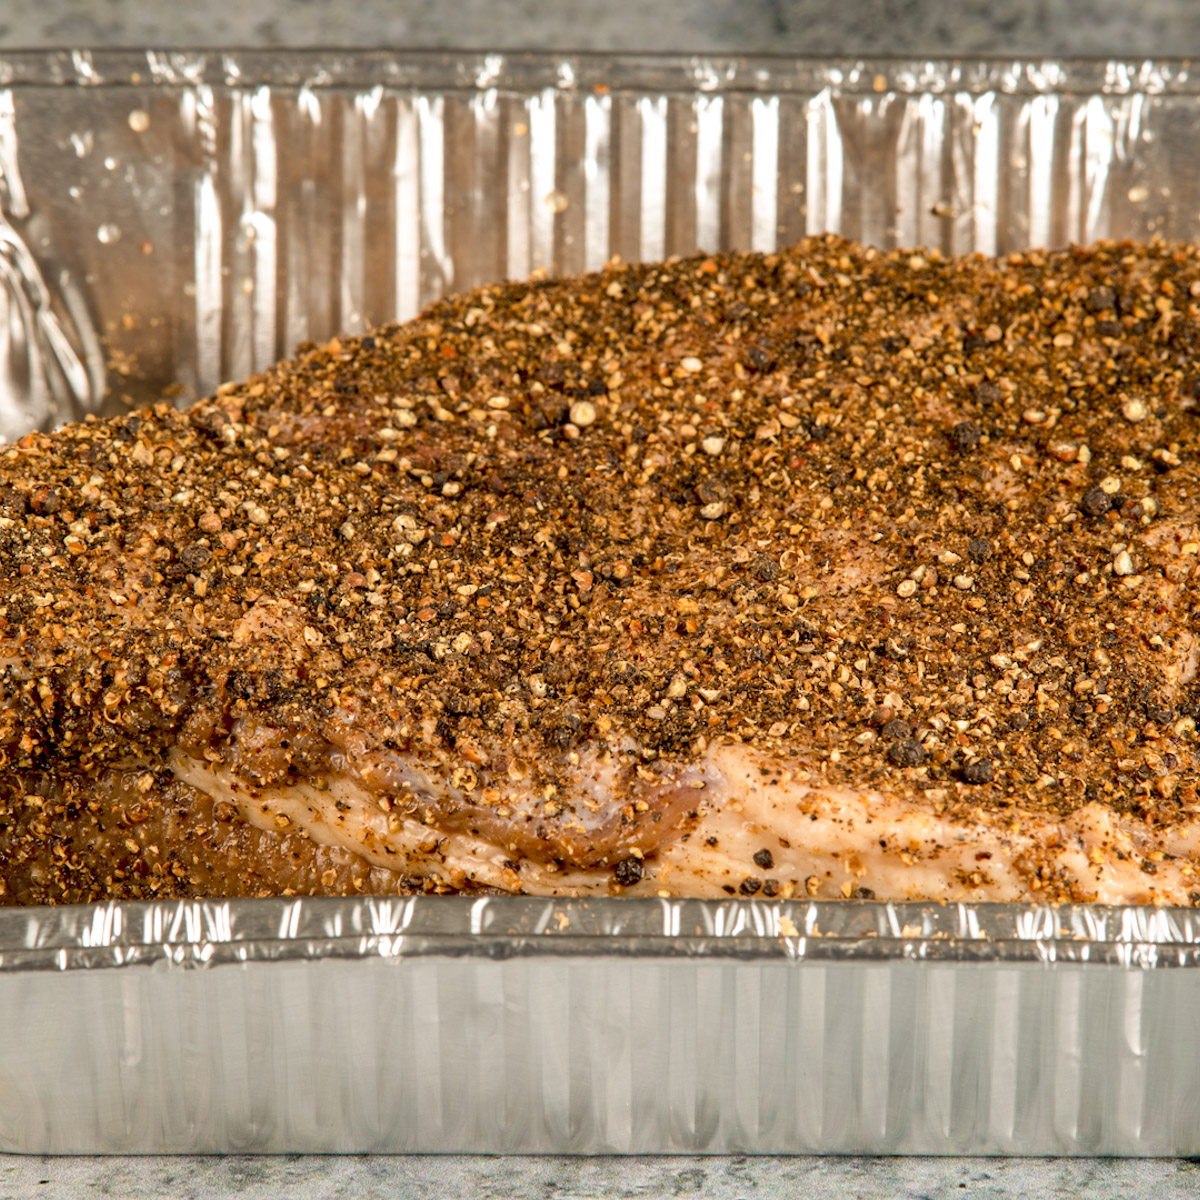 Season the brined brisket and place it in a foil tray.